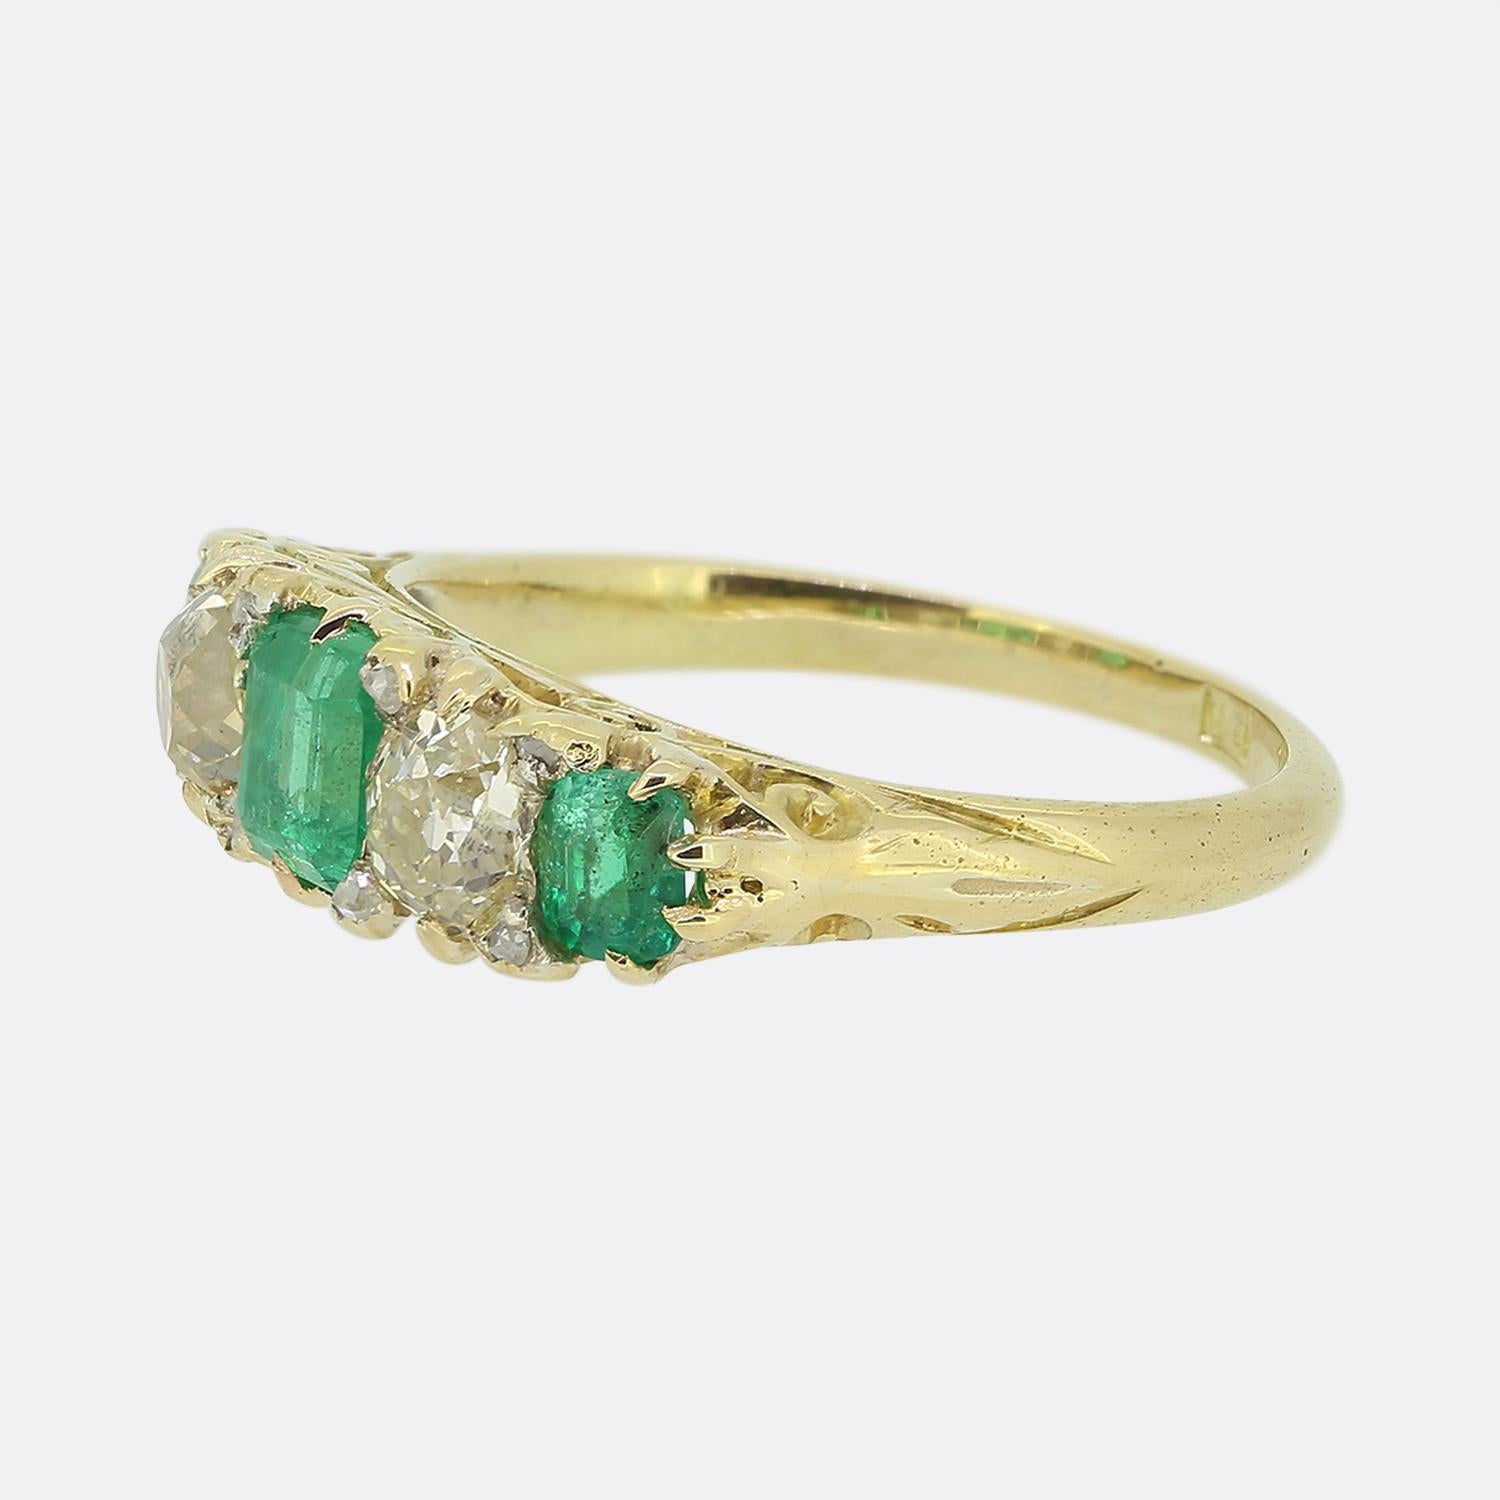 Here we have a classic 18ct yellow gold Edwardian five-stone ring. The piece showcases an alternating sequence of gem stones in a single line formation. An emerald cut natural emerald sits at the centre and is flanked on either side by a chunky old